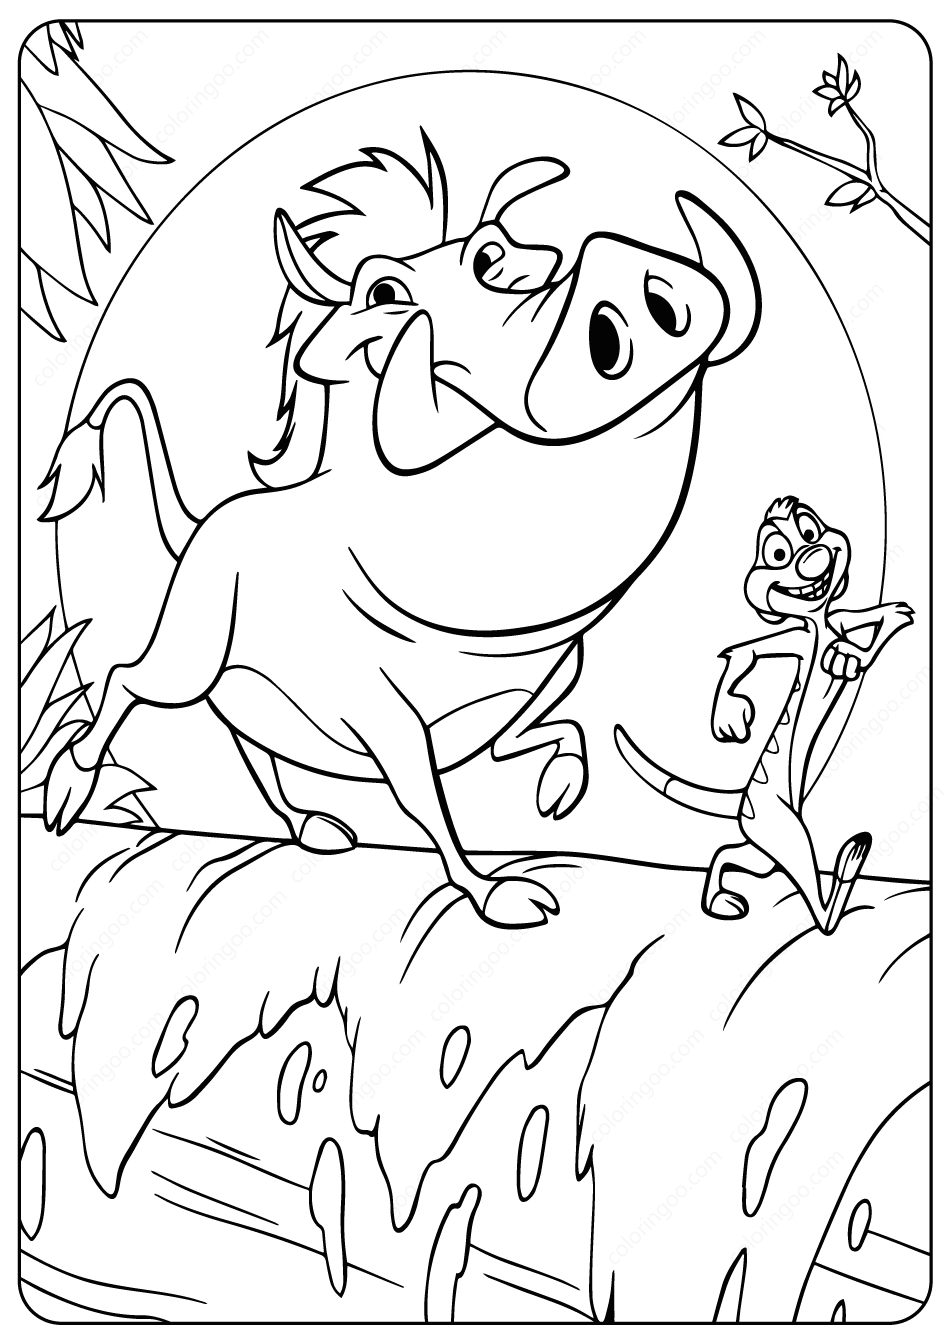 The Lion King Timon and Pumbaa Coloring Pages